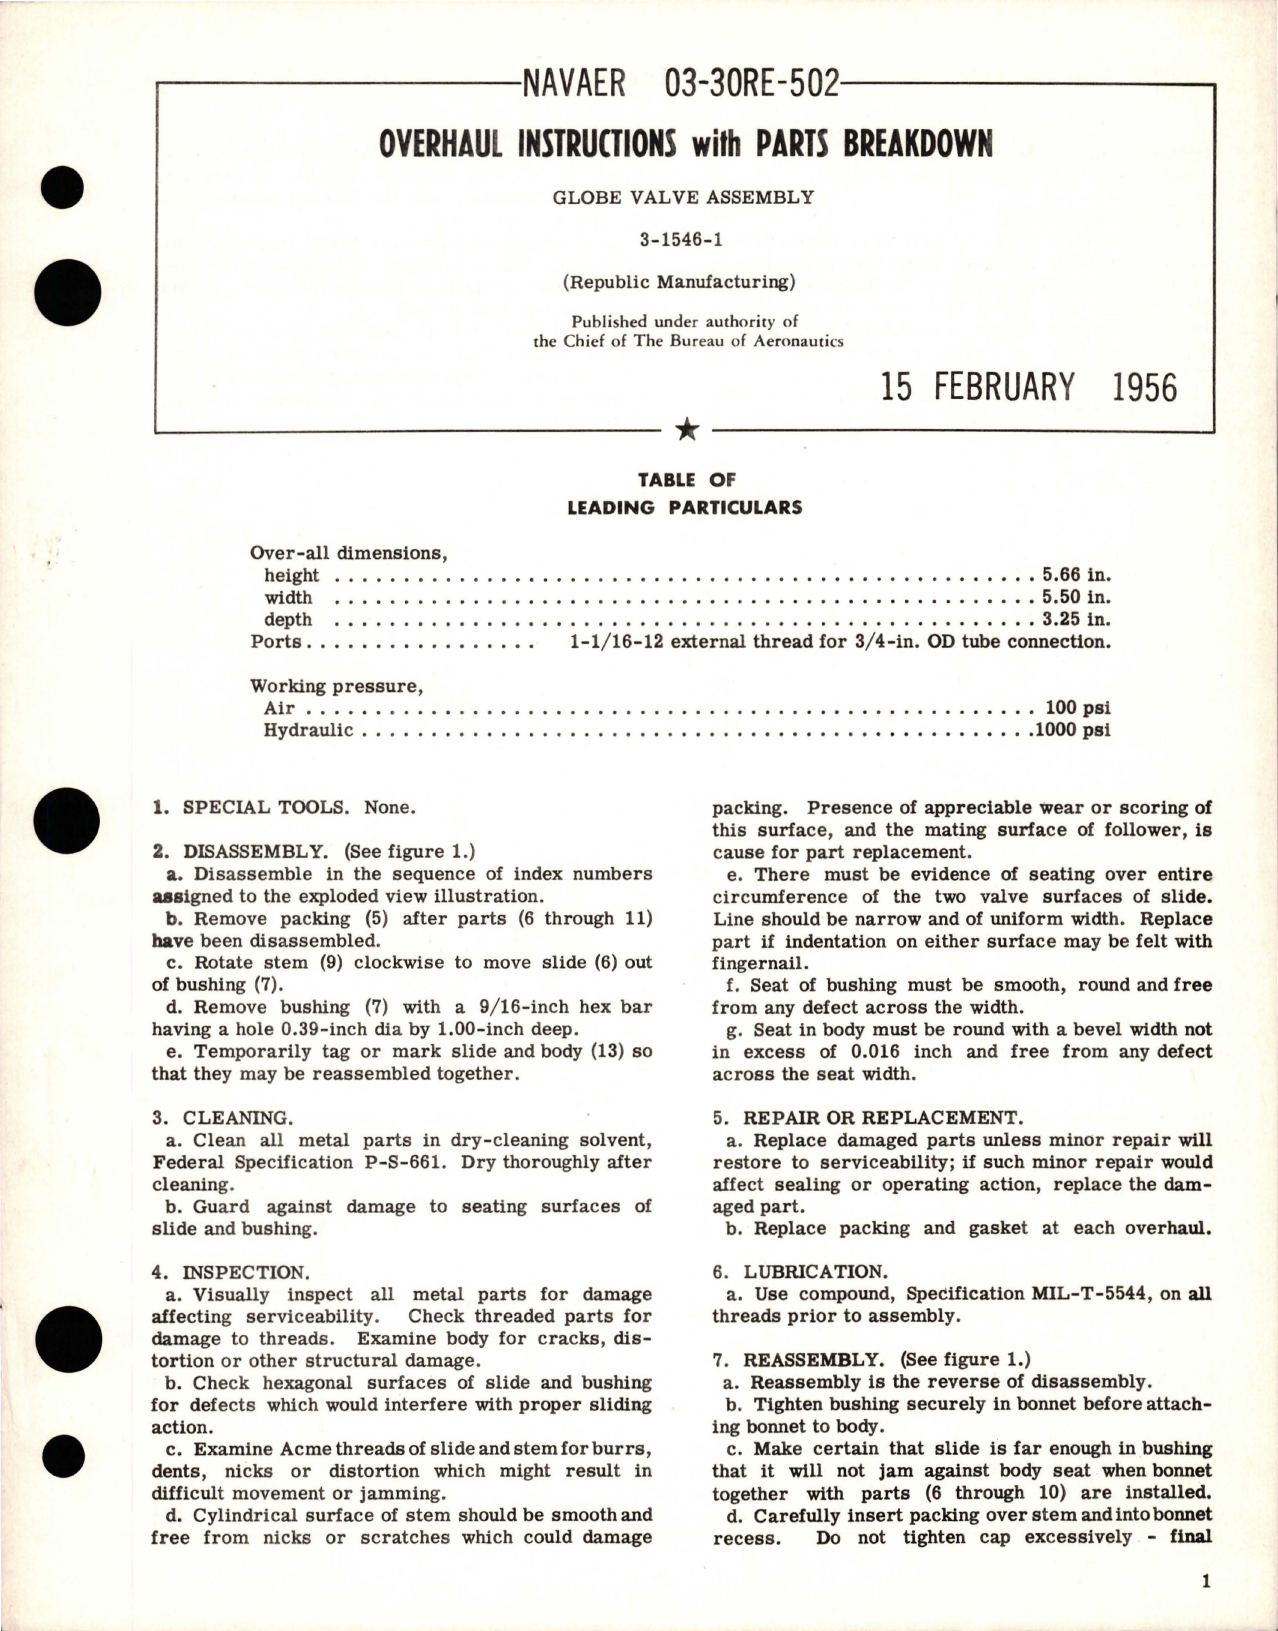 Sample page 1 from AirCorps Library document: Overhaul Instructions with Parts Breakdown for Globe Valve Assembly - 3-1546-1